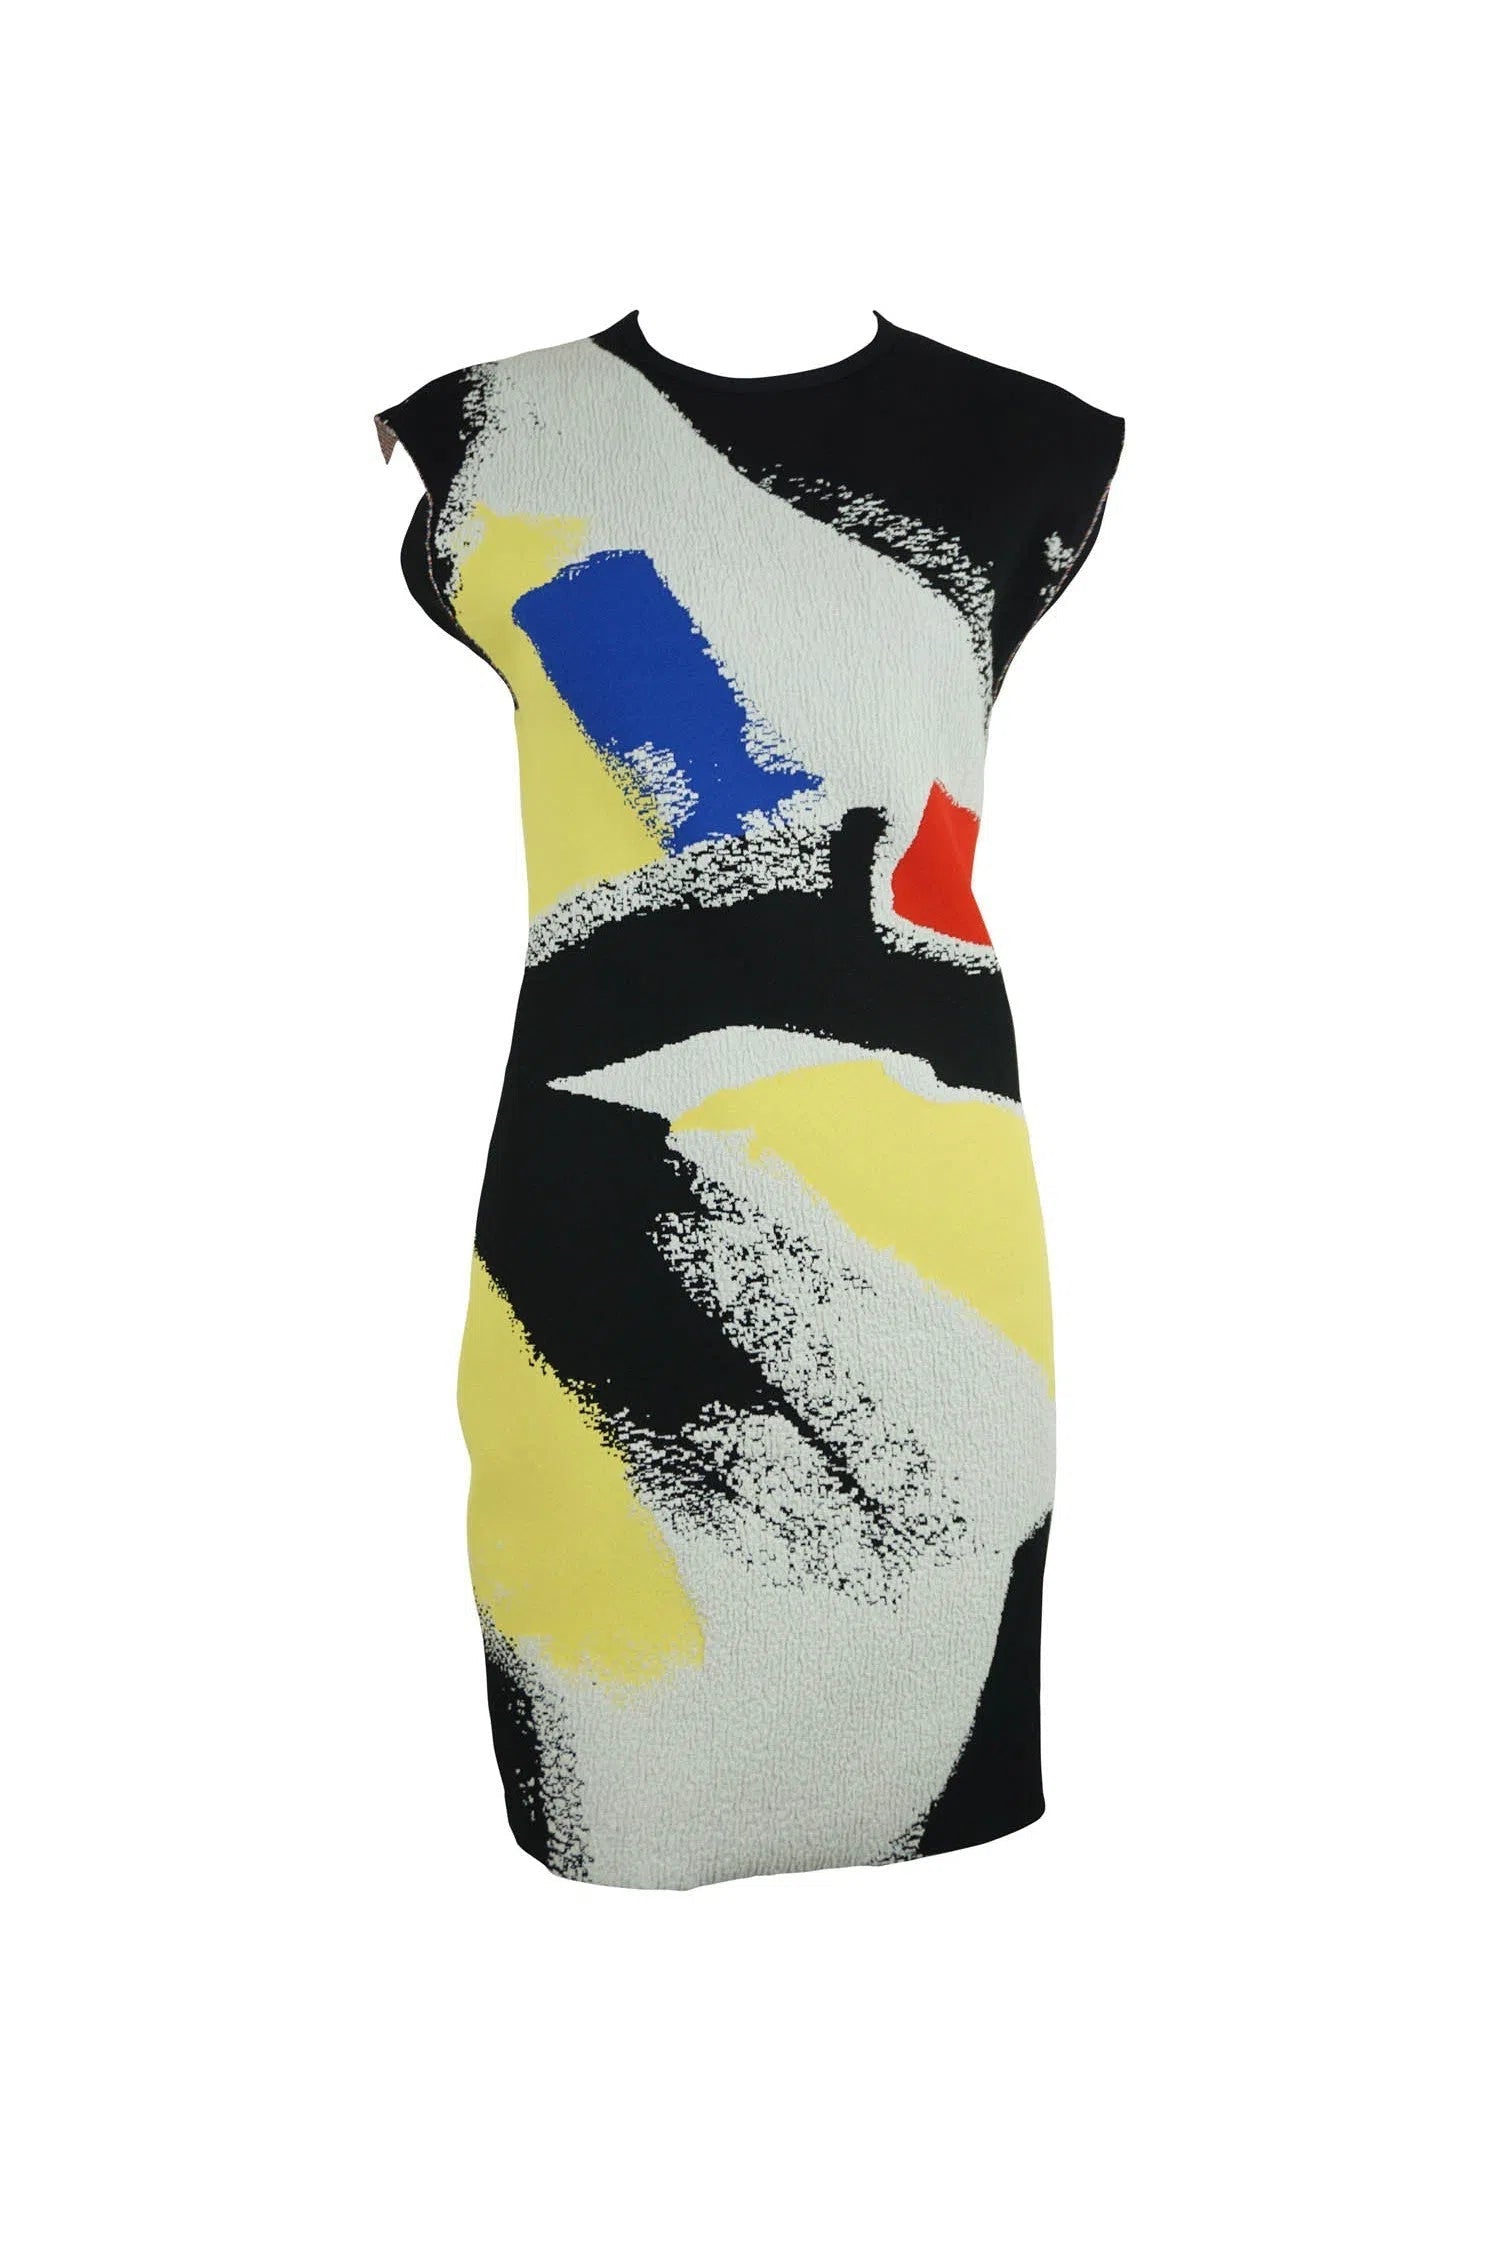 Celine by Phoebe Philo Primary Brushstroke Dress 2014 Spring - Foxy Couture Carmel